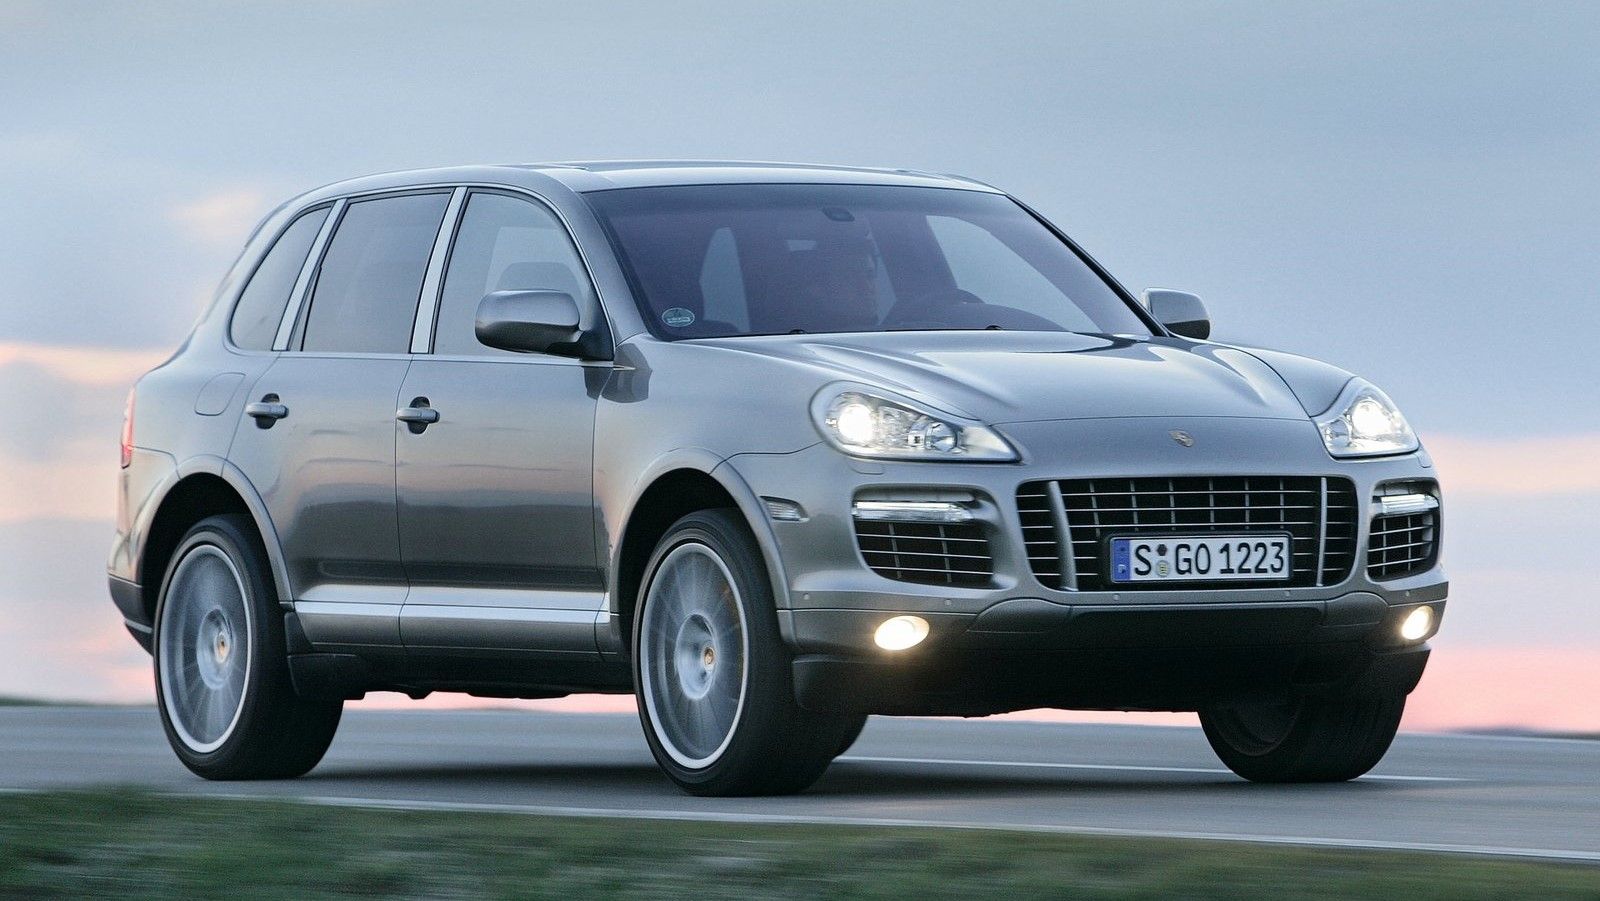 A silver 2009 Porsche Cayenne GTS driving down a country road.